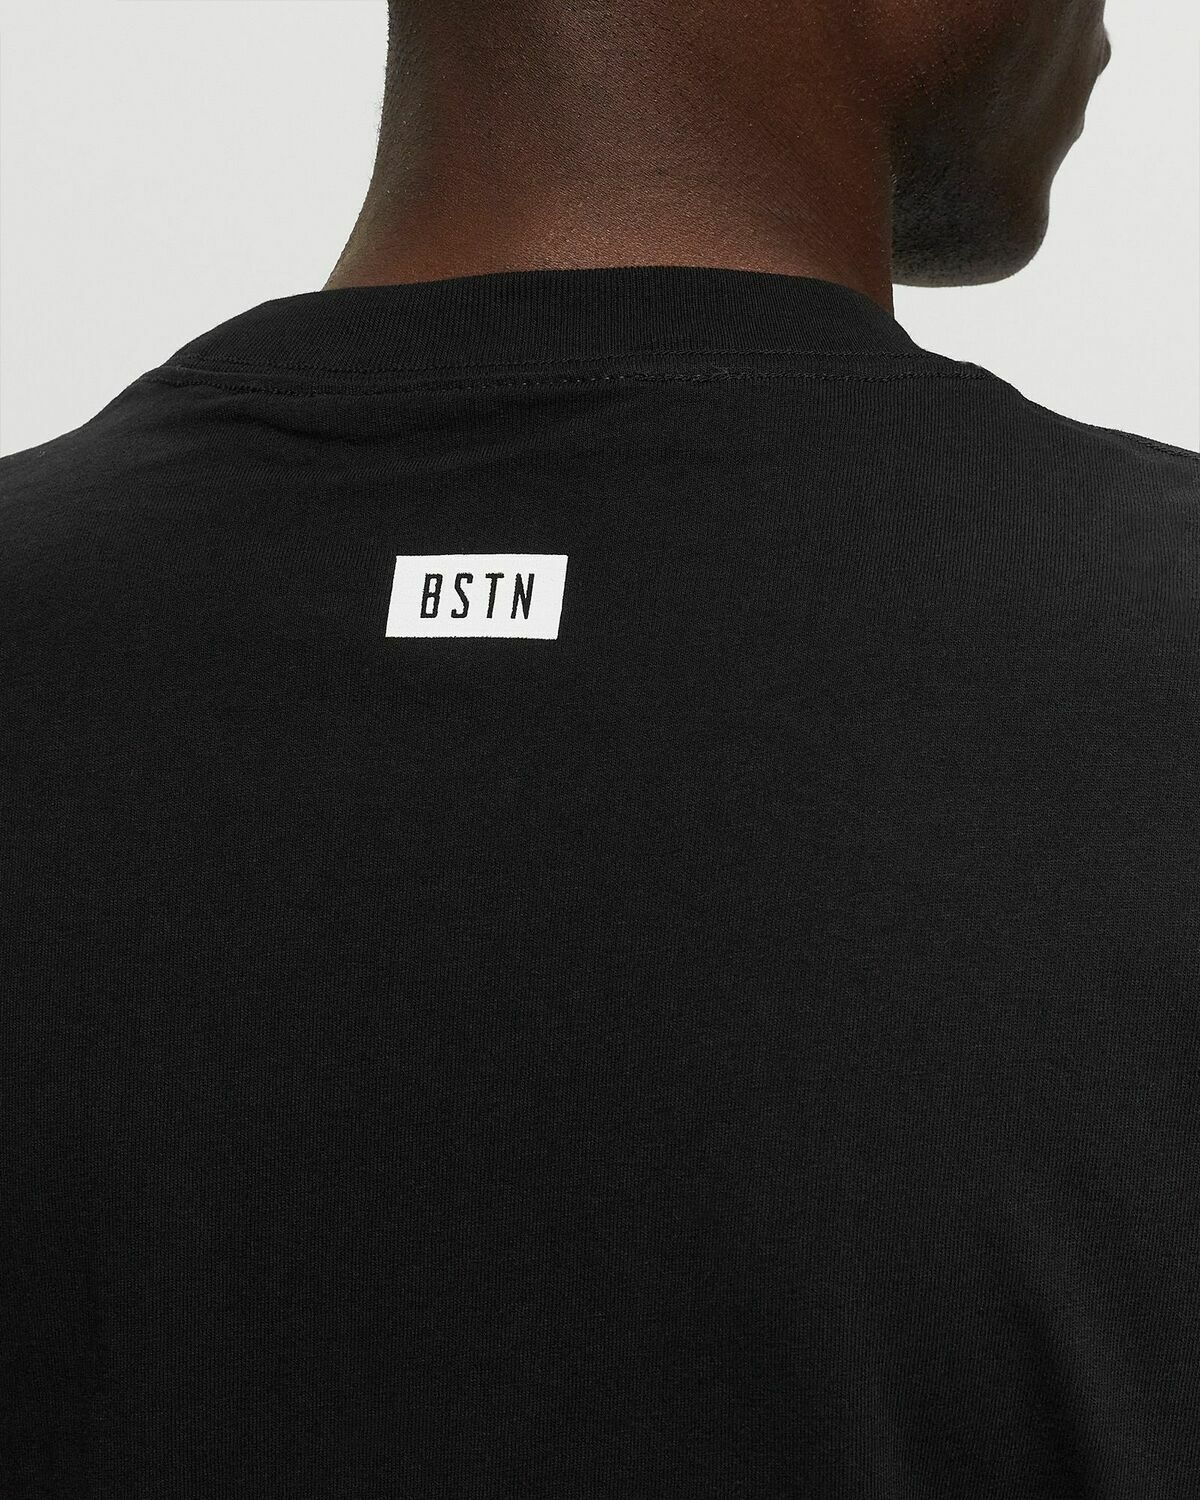 Bstn Brand From The South From The Heart Tee Black - Mens - Shortsleeves